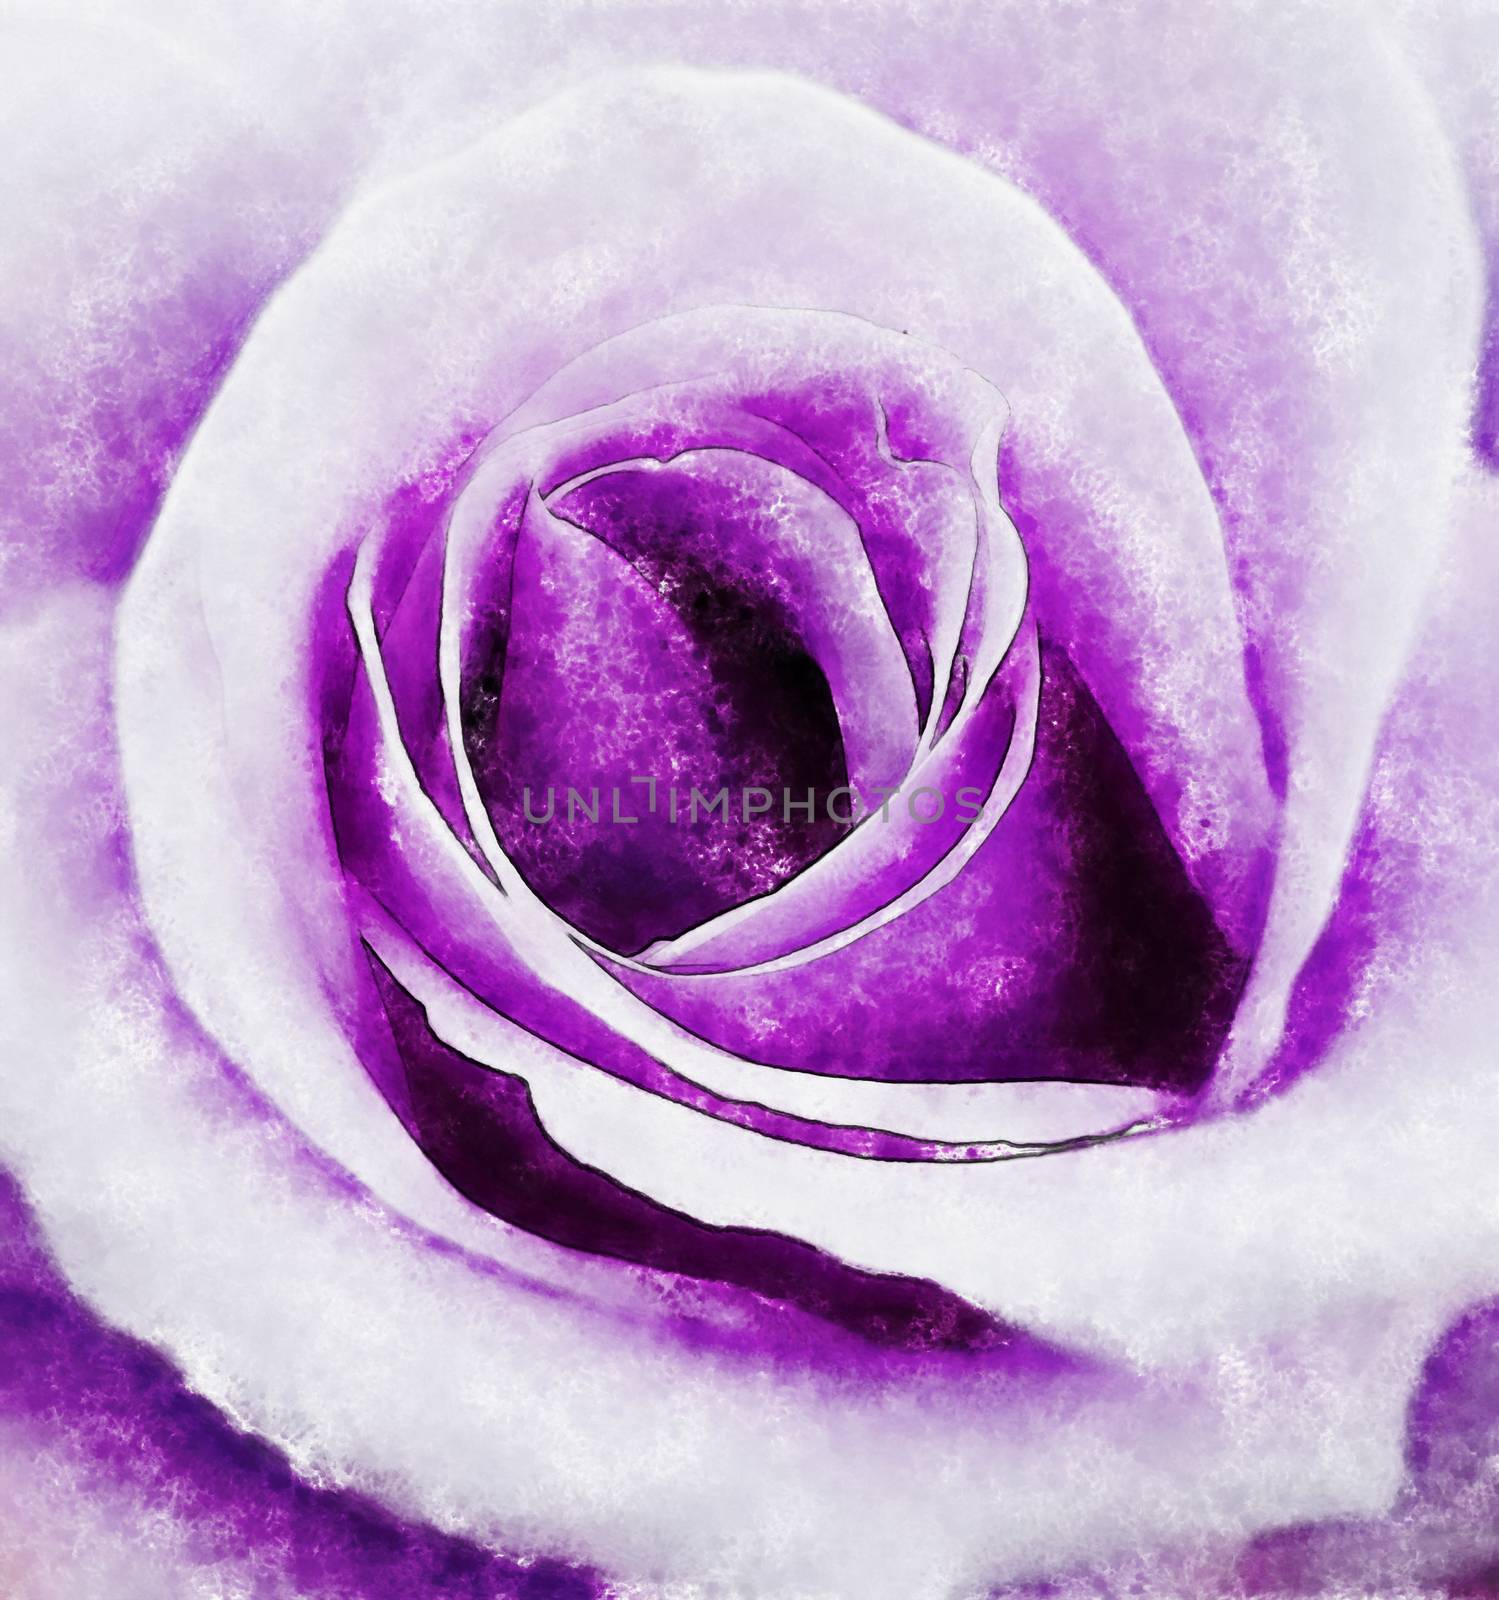 Closeup violet rose fine art, digital painting created by hand using several techniques to resemble watercolor on paper.